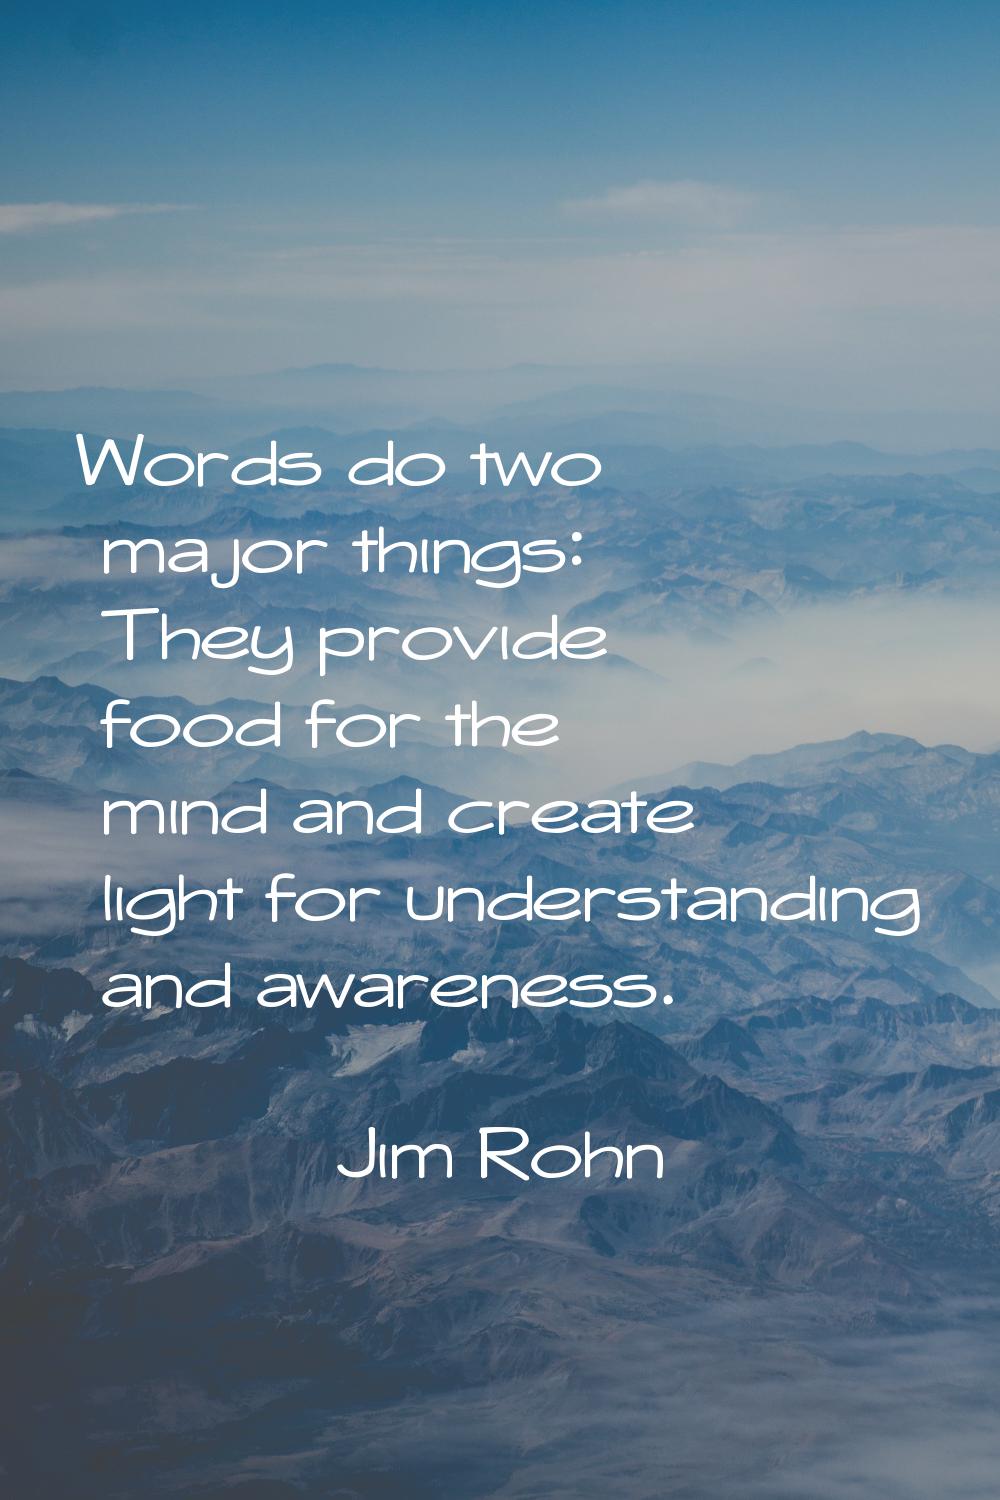 Words do two major things: They provide food for the mind and create light for understanding and aw